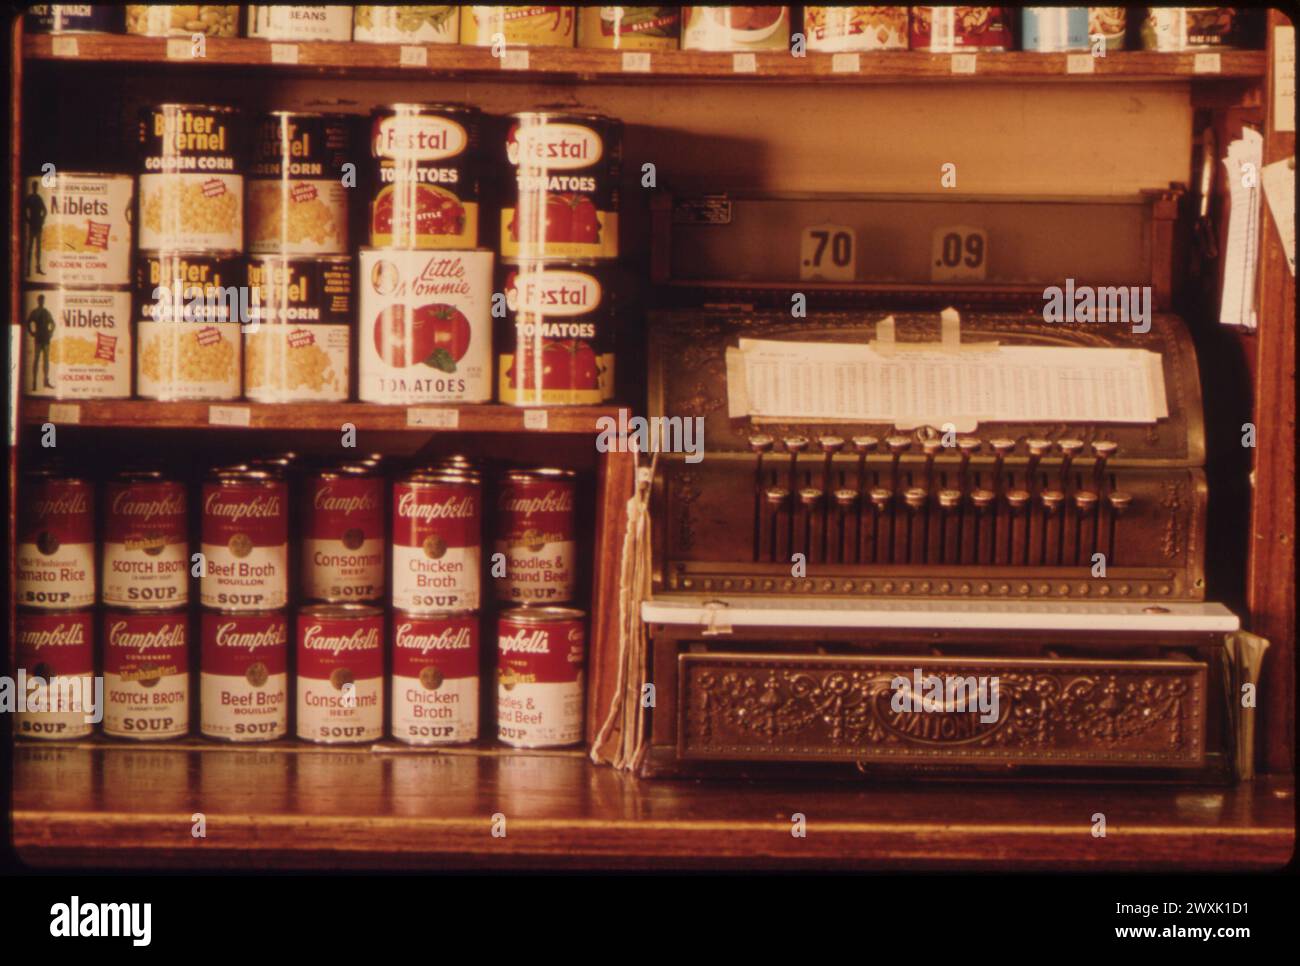 Vintage American Photograph 1970s.  Old Style Cash Register and Canned Goods in a Butcher Shop in New Ulm, Minnesota ..., October 1974 .  Source Series: DOCUMERICA: The Environmental Protection Agency's Program to Photographically Document Subjects of Environmental Concern, by Bruce  Bisping. Stock Photo